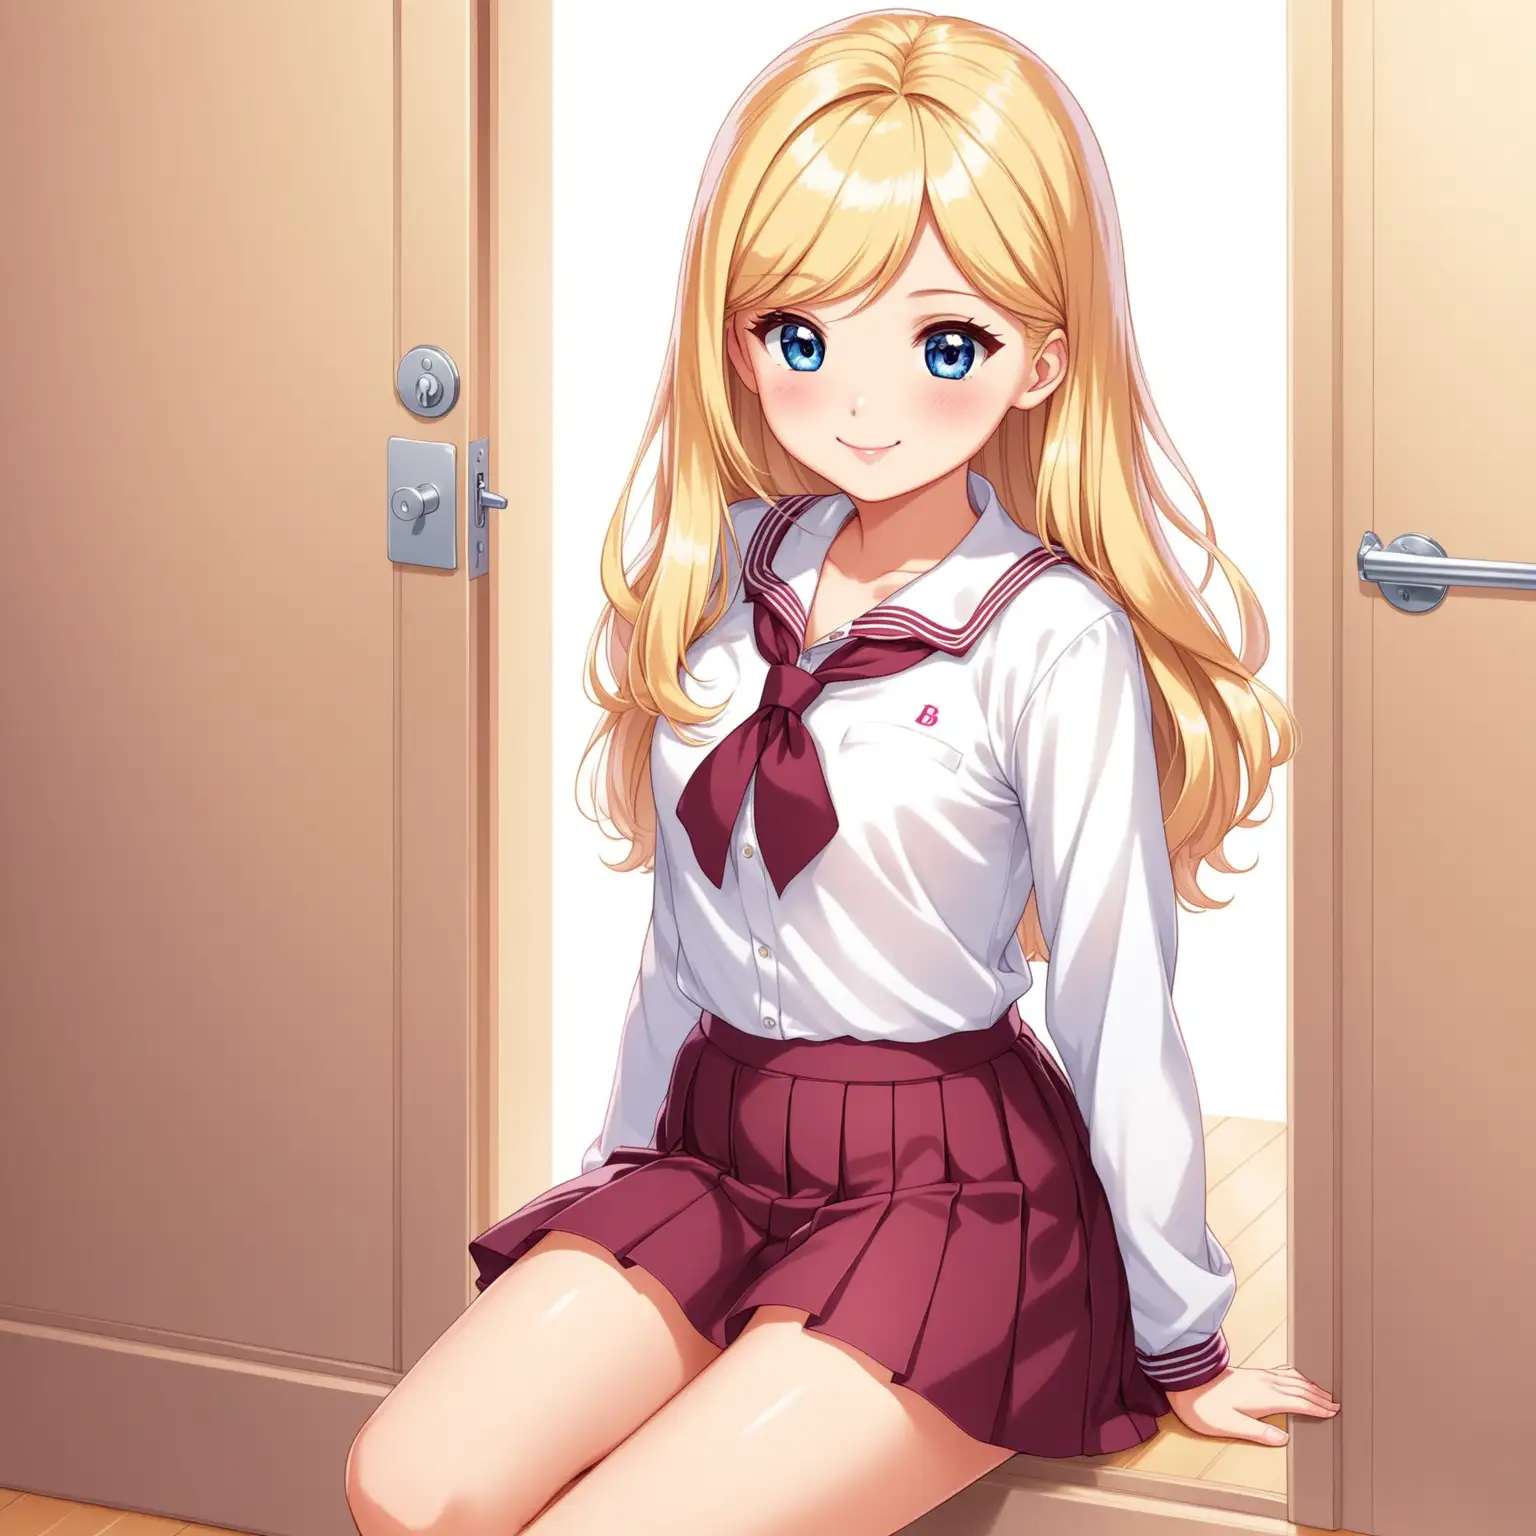 Teenage Barbie in School Uniform with Shy Smile and Bare Feet